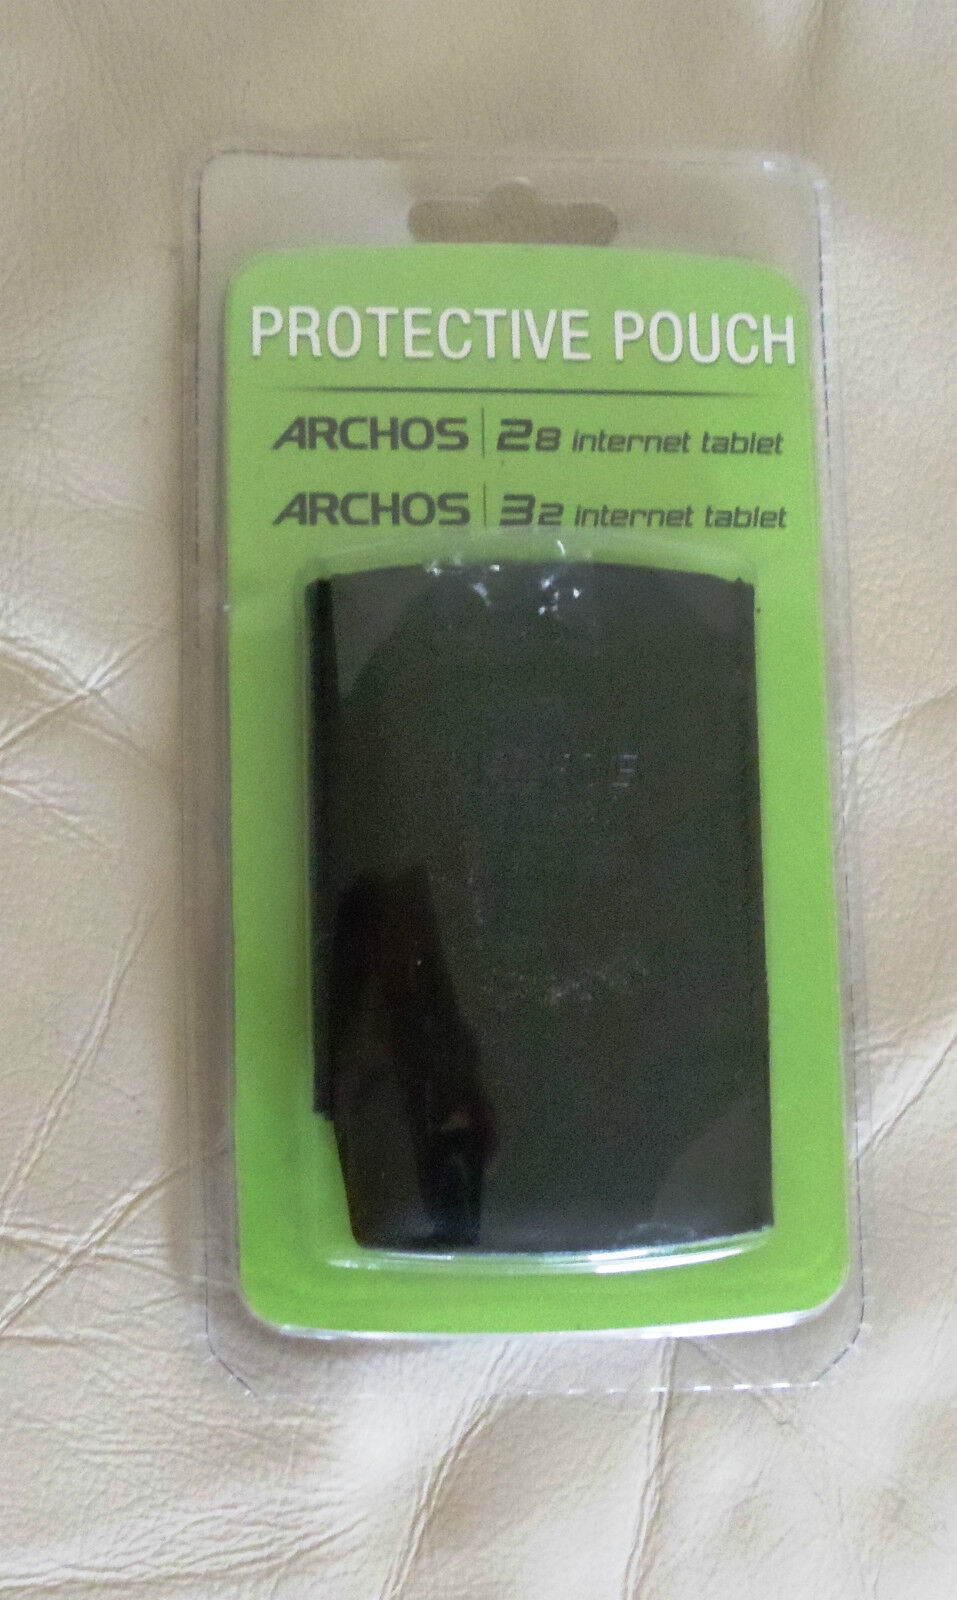 Archos 28 and 32 Internet Tablet Protective Pouch P/N 501644   